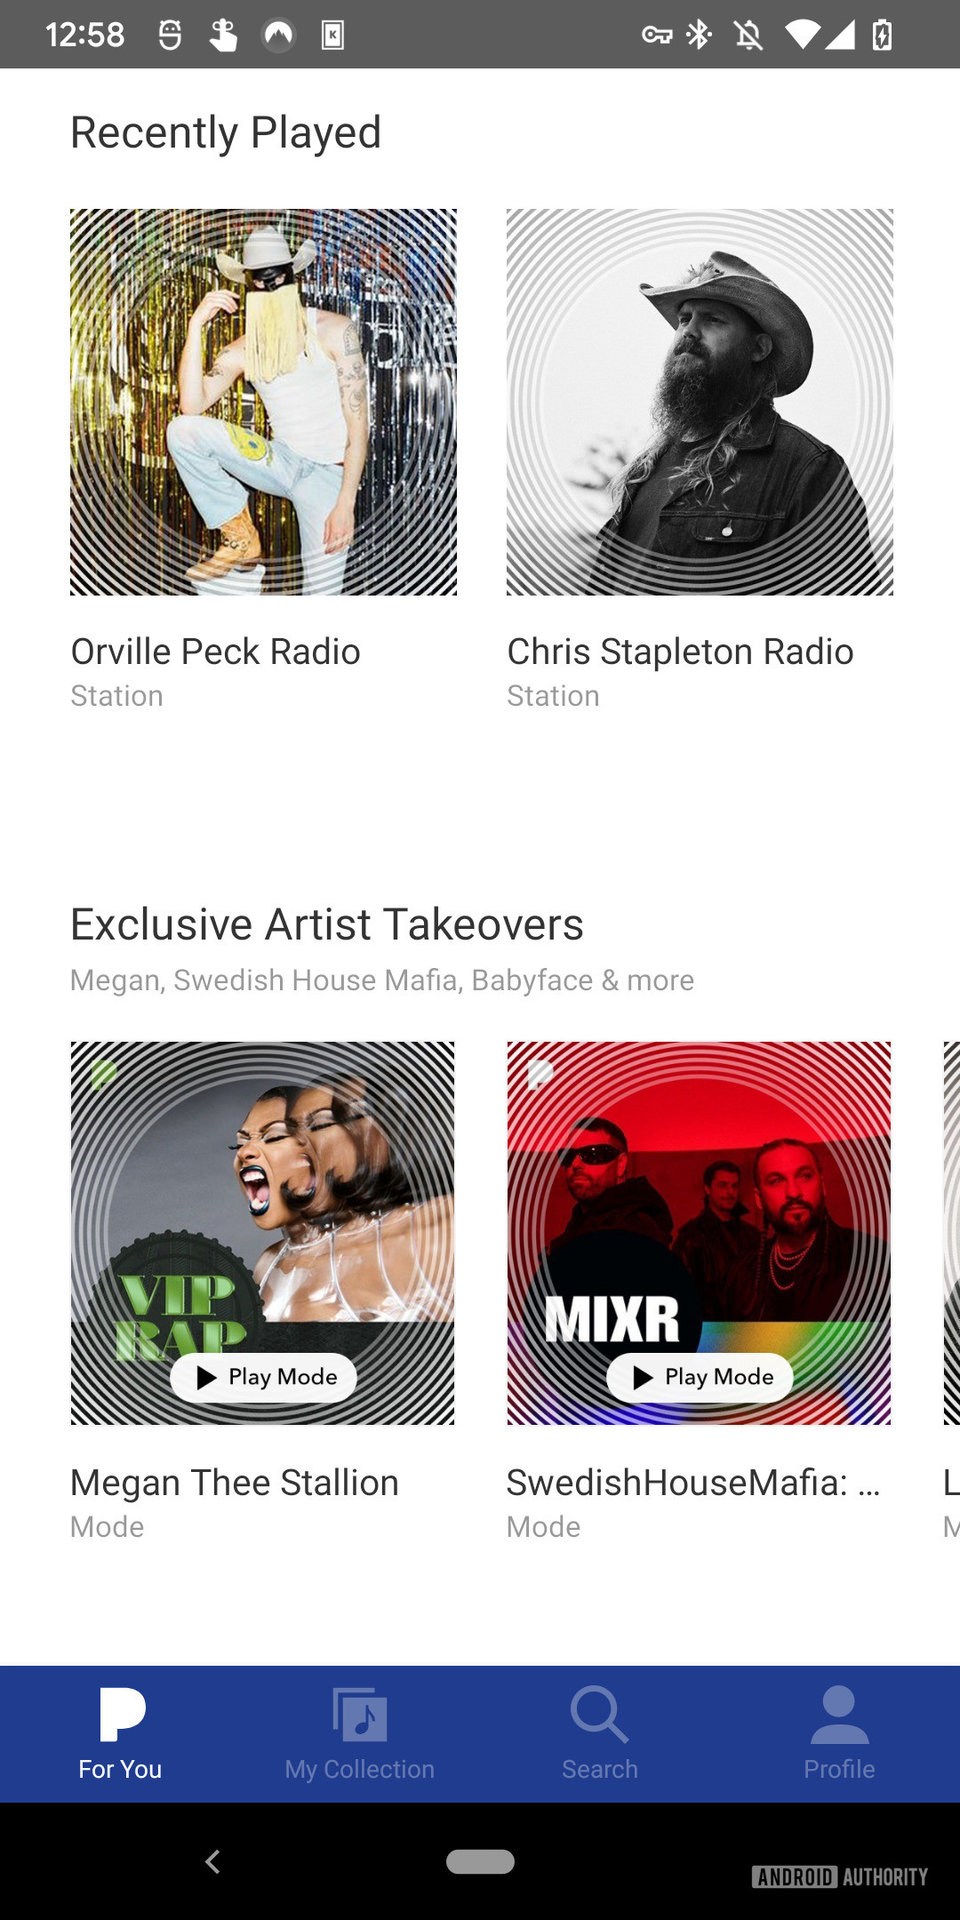 Screenshot of the Pandora app showing the Exclusive Artist Takeovers section.